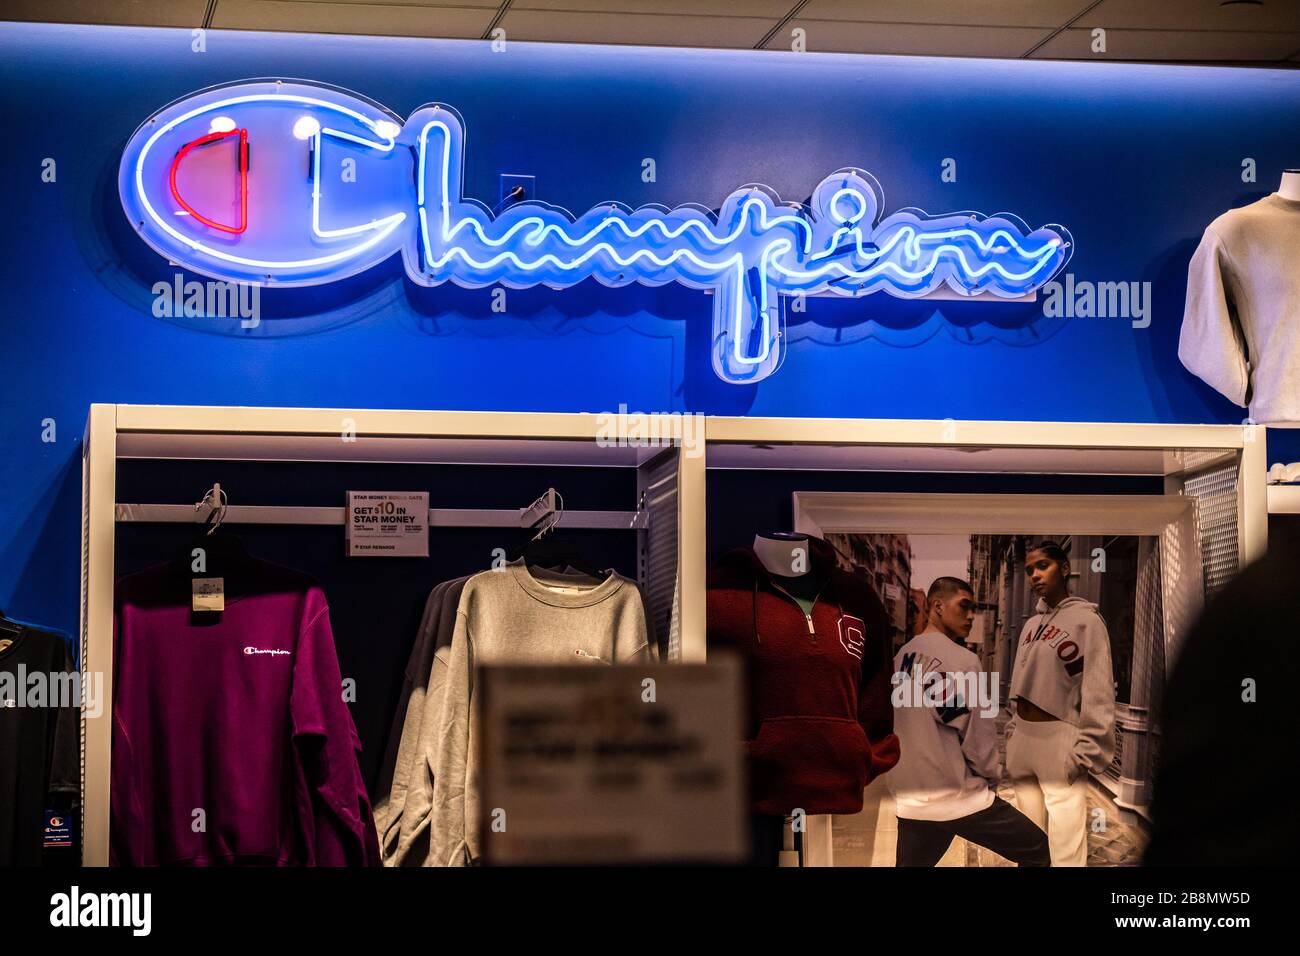 American clothing manufacturer, stall seen Macy's department store New York City Stock Photo - Alamy